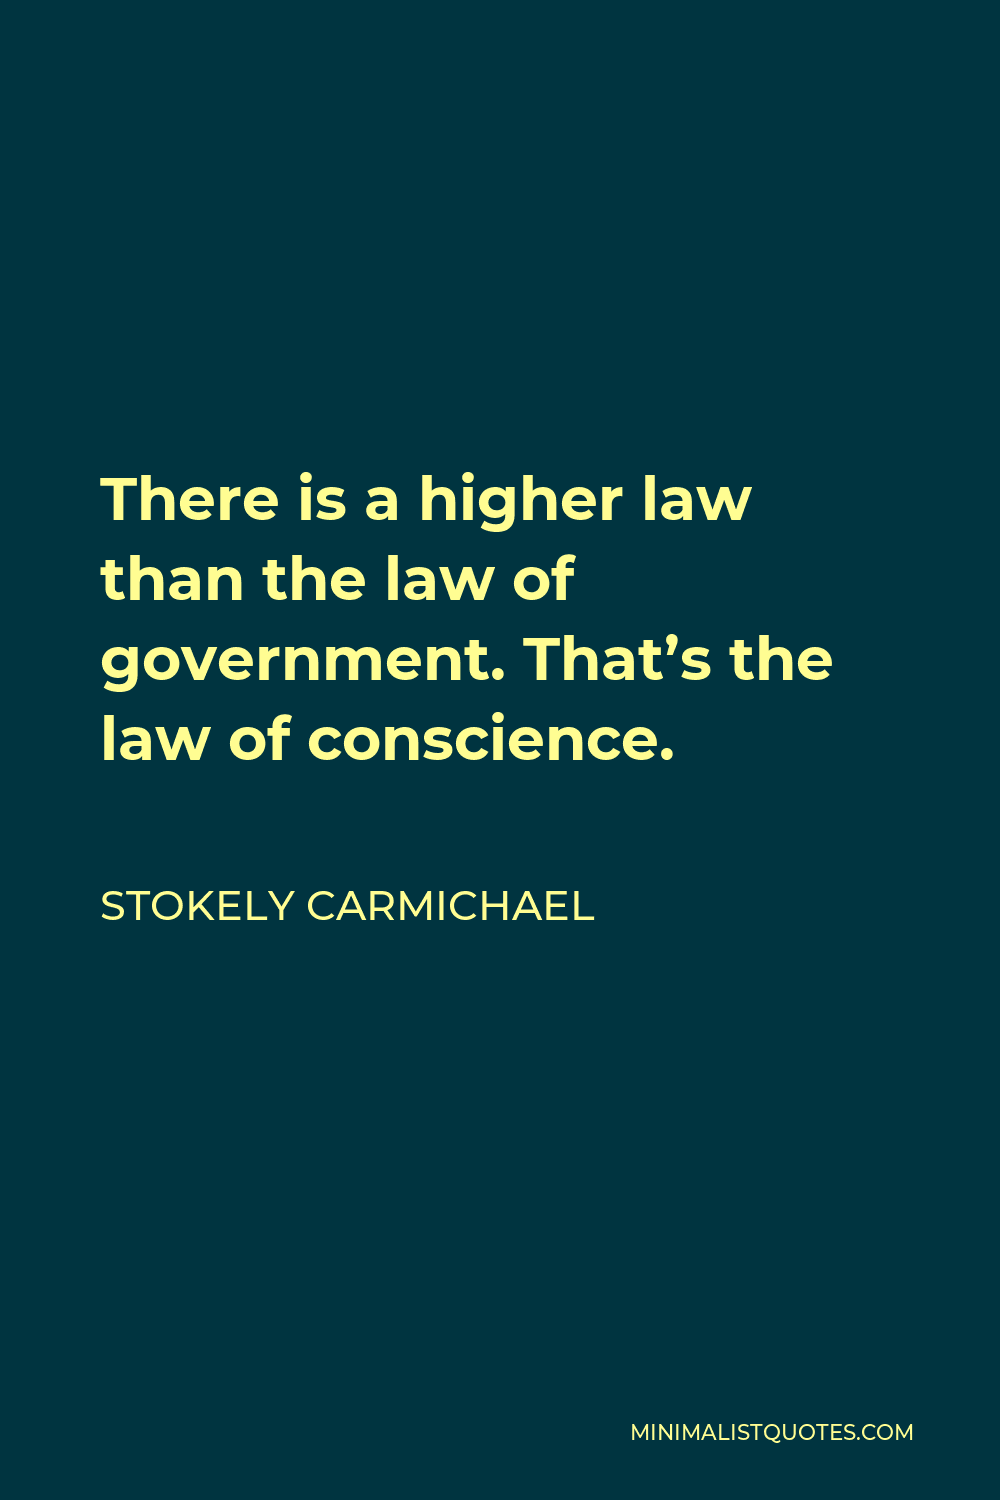 Stokely Carmichael Quote - There is a higher law than the law of government. That’s the law of conscience.